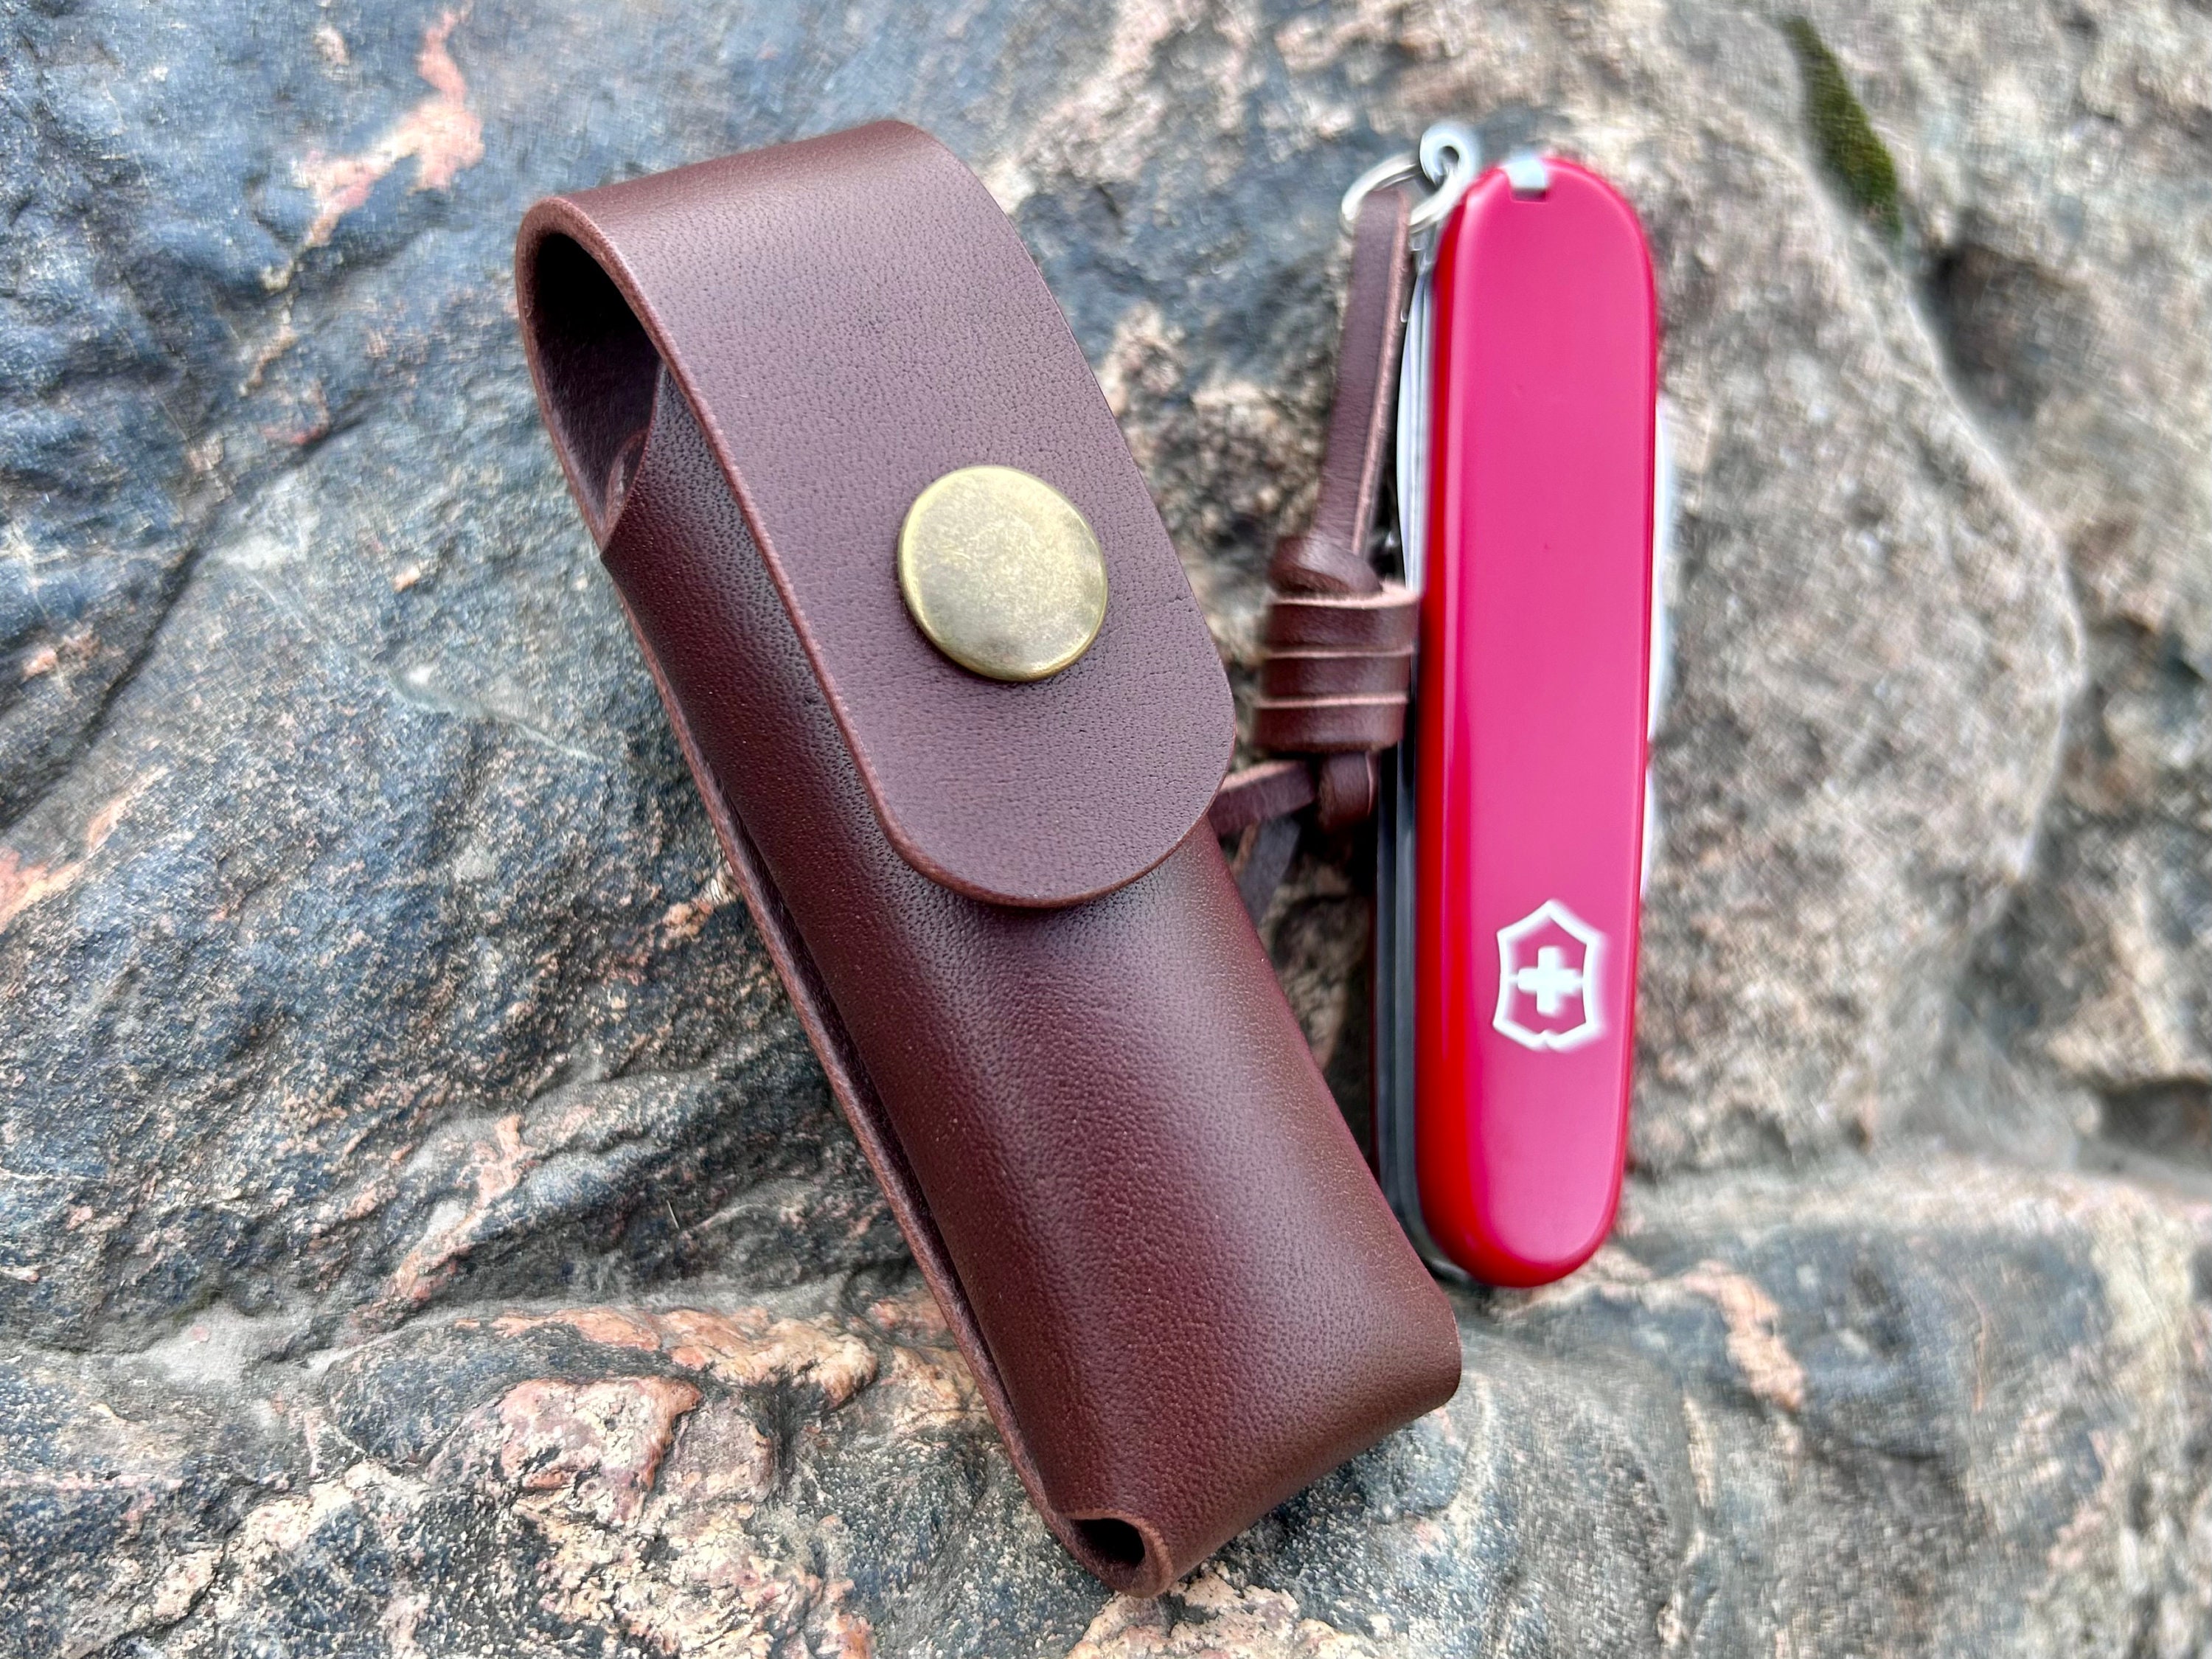 Swiss Army Knife Review: The Victorinox Spartan (Perfect for the Pocket)